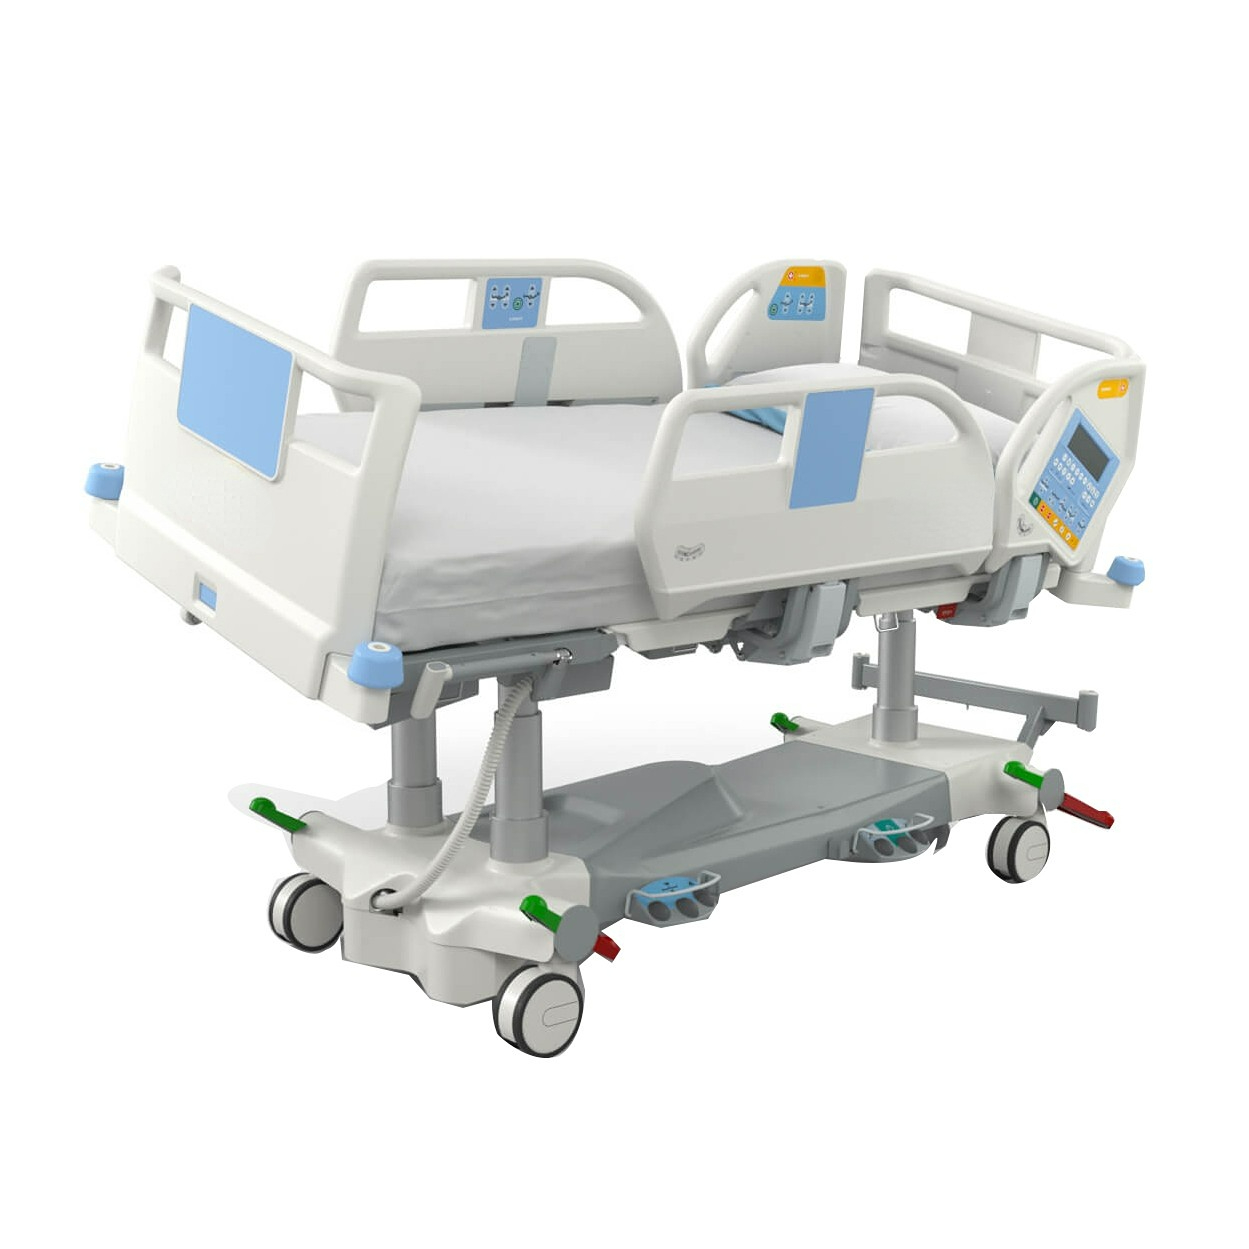 VICENTE M9000 Electric Hospital Bed